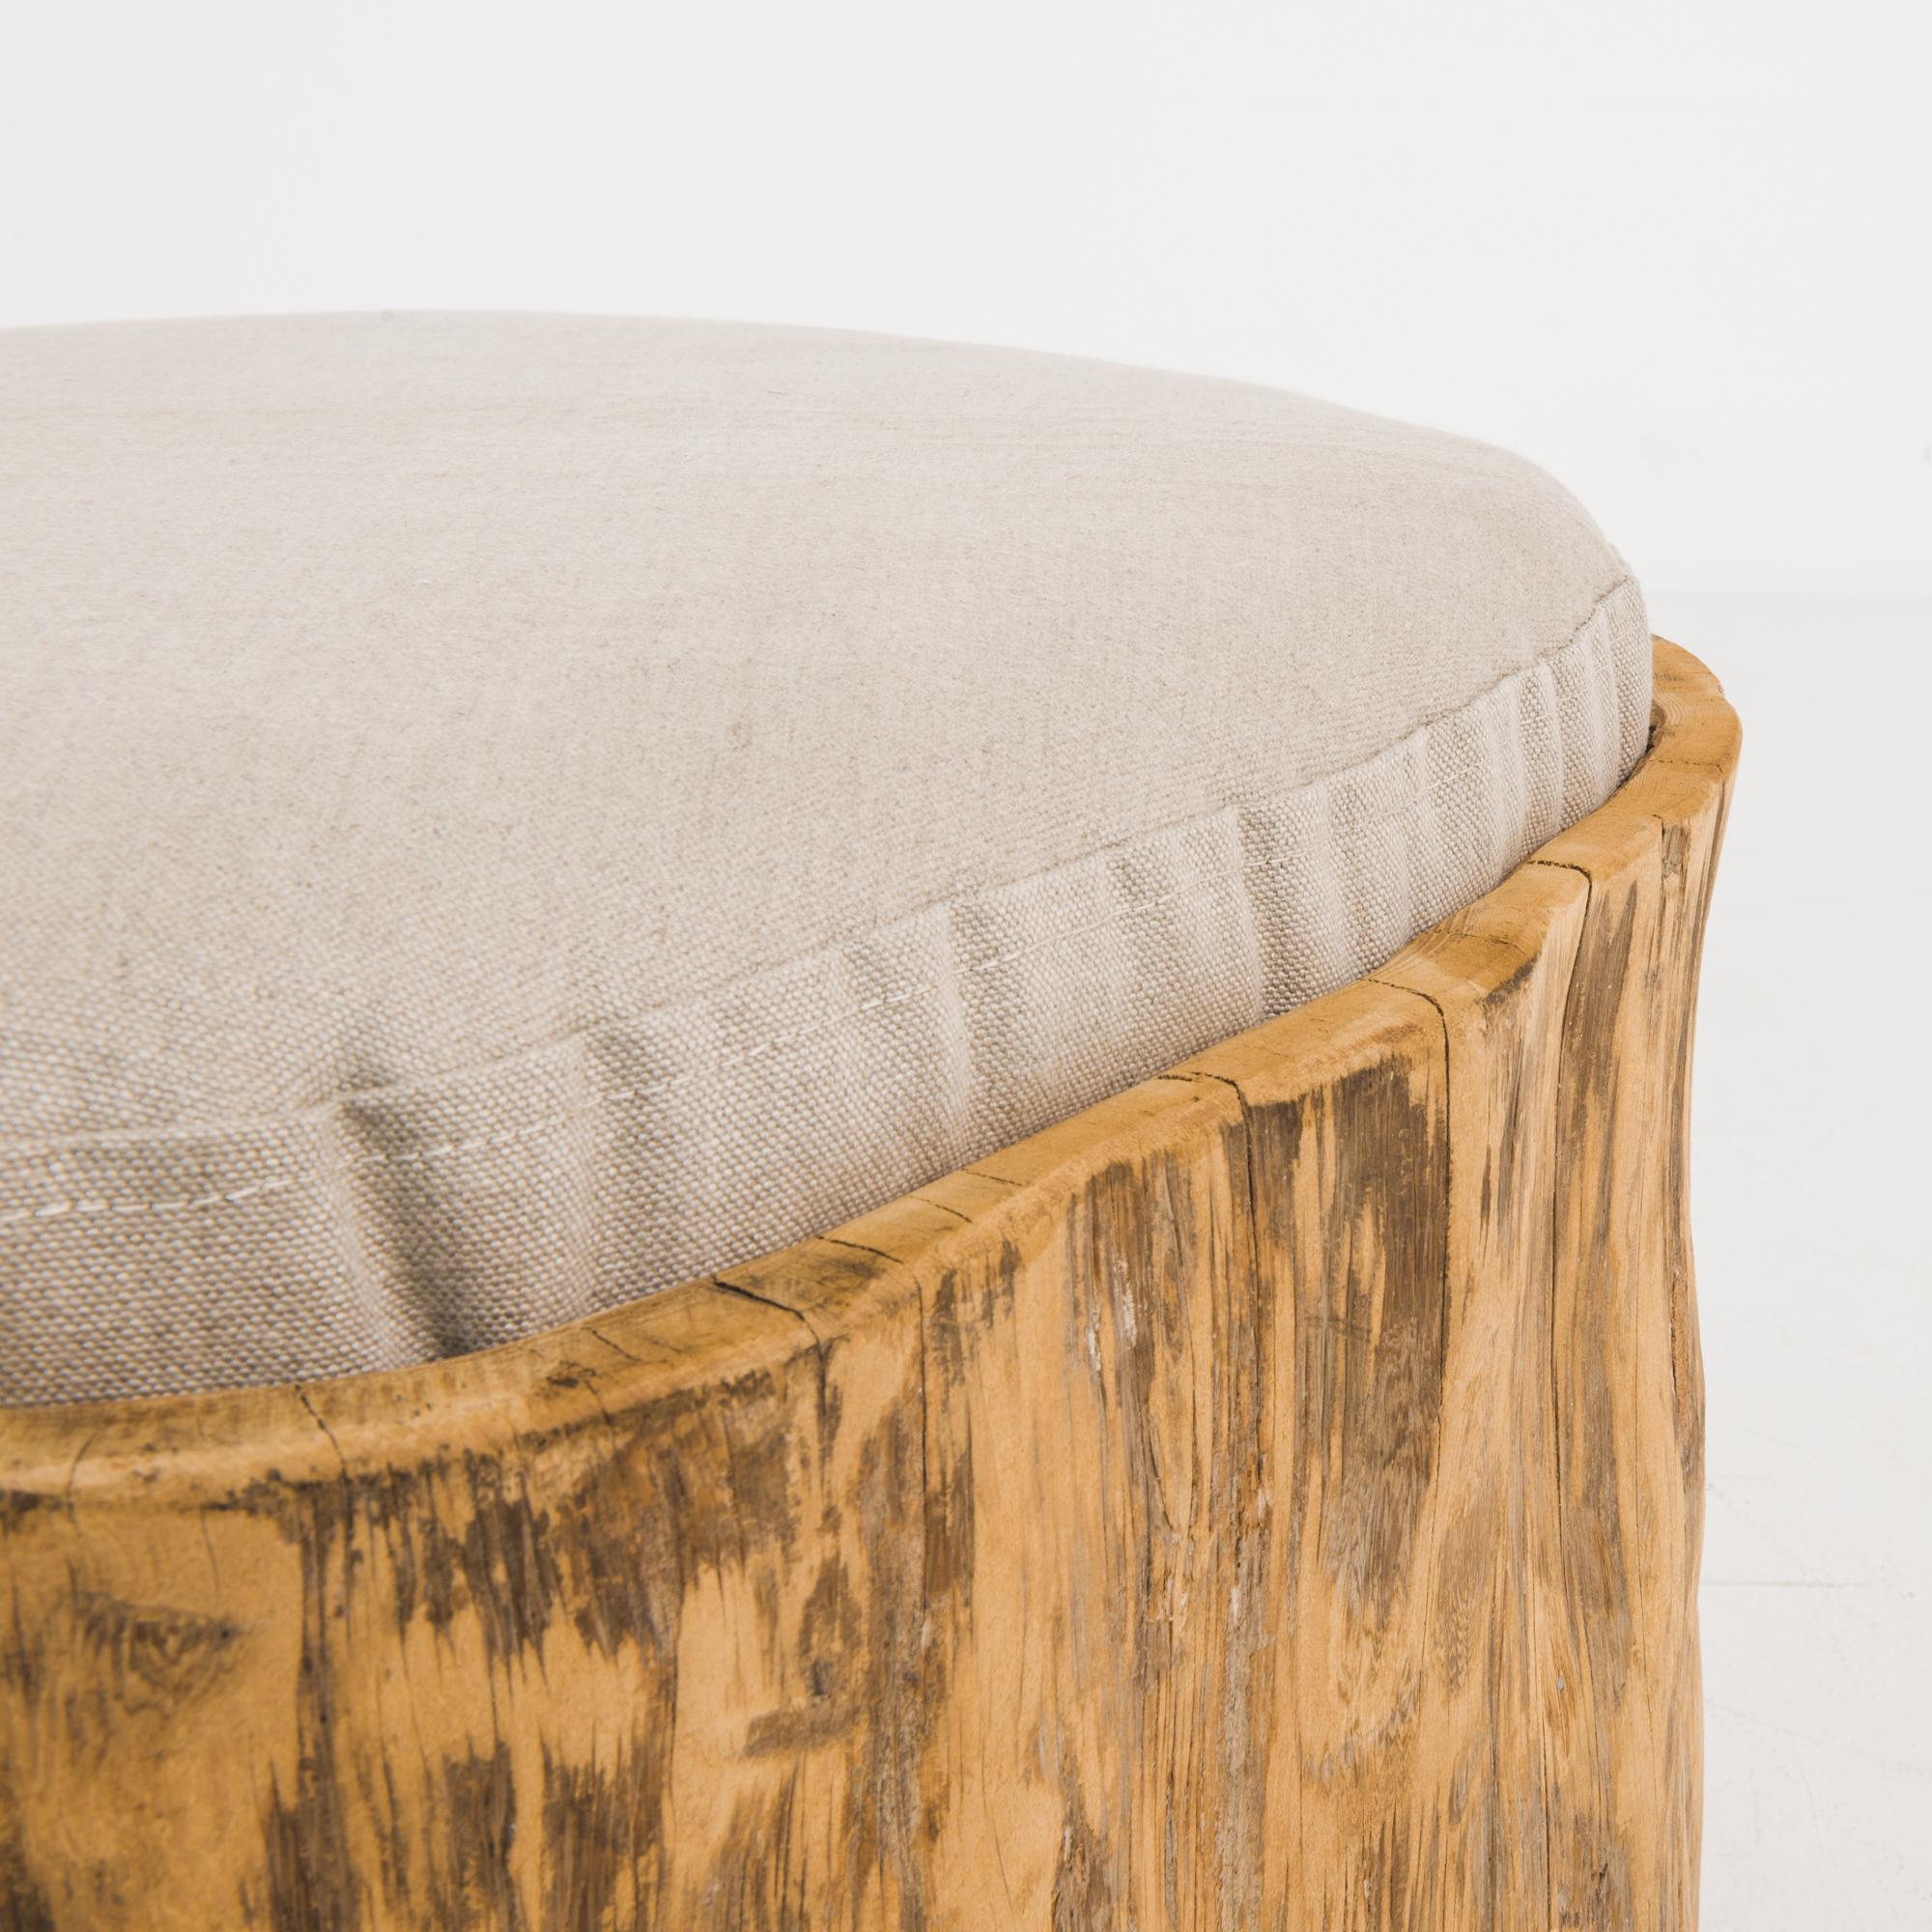 Polish Central European Tree Trunk with Upholstered Seat